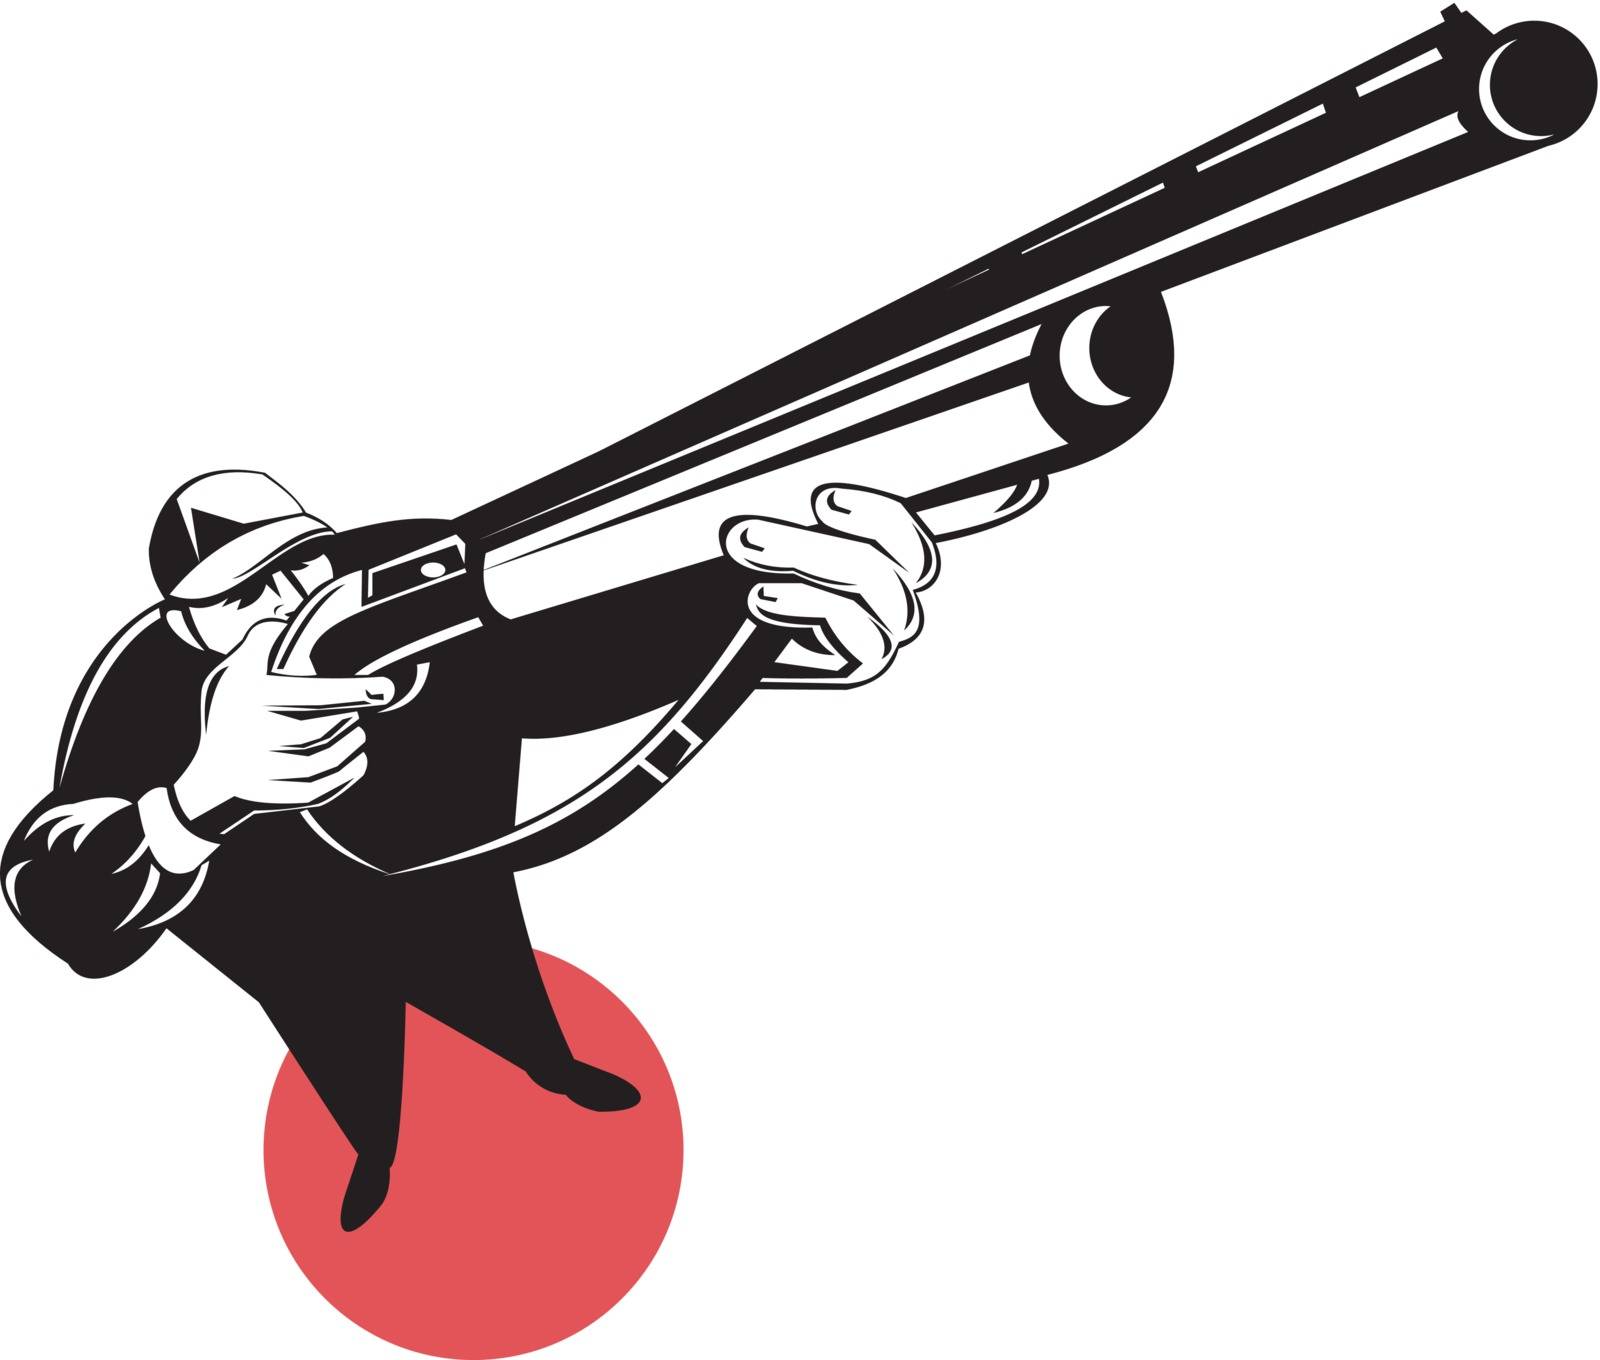 illustration of a hunter aiming shotgun rifle gun done in retro style on isolated background viewed from high angle